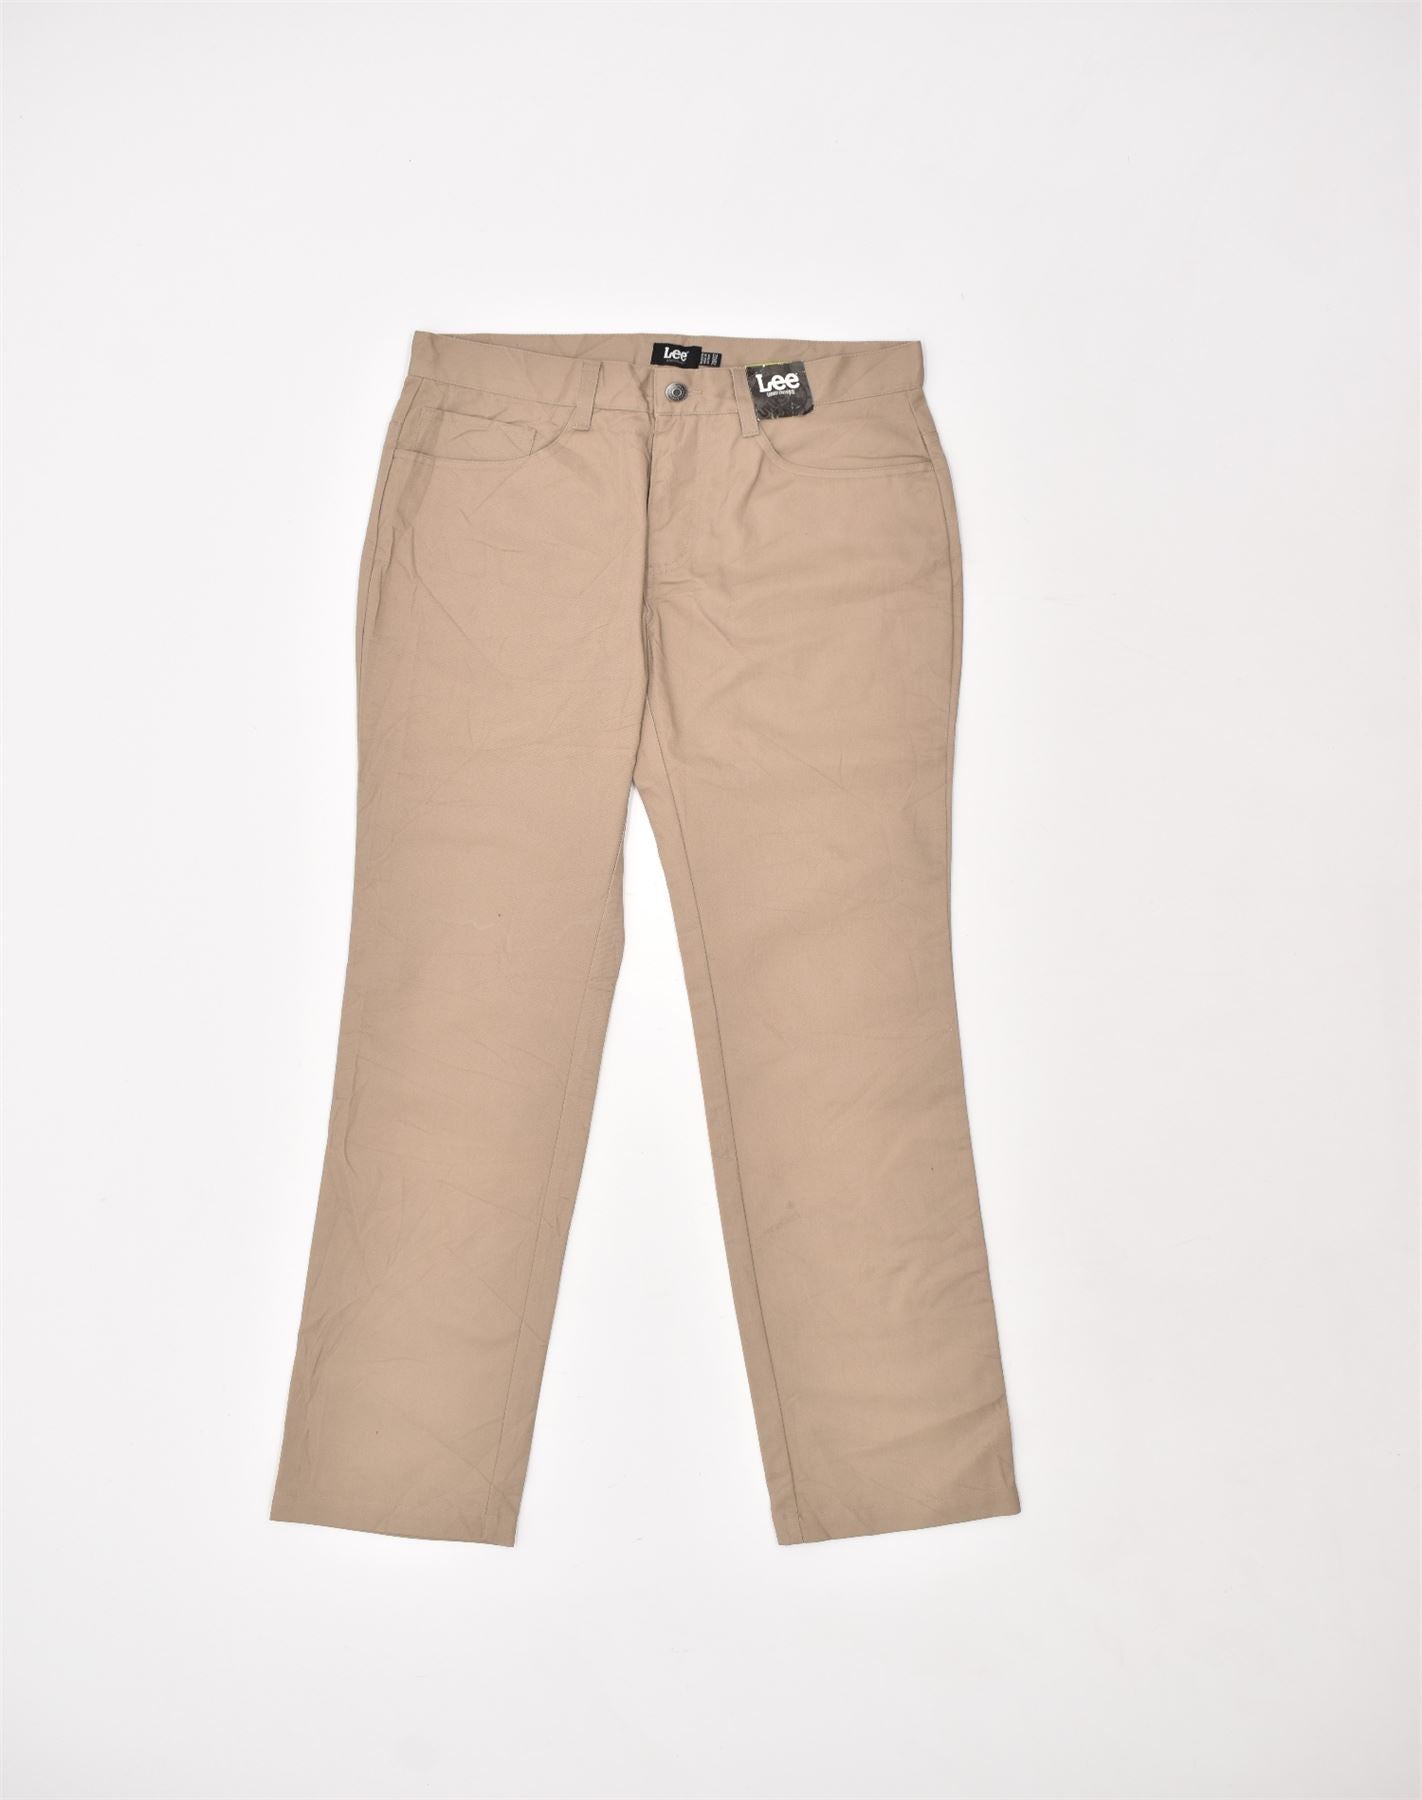 Buy LEE COOPER Solid Regular Fit Cotton Womens Trousers | Shoppers Stop